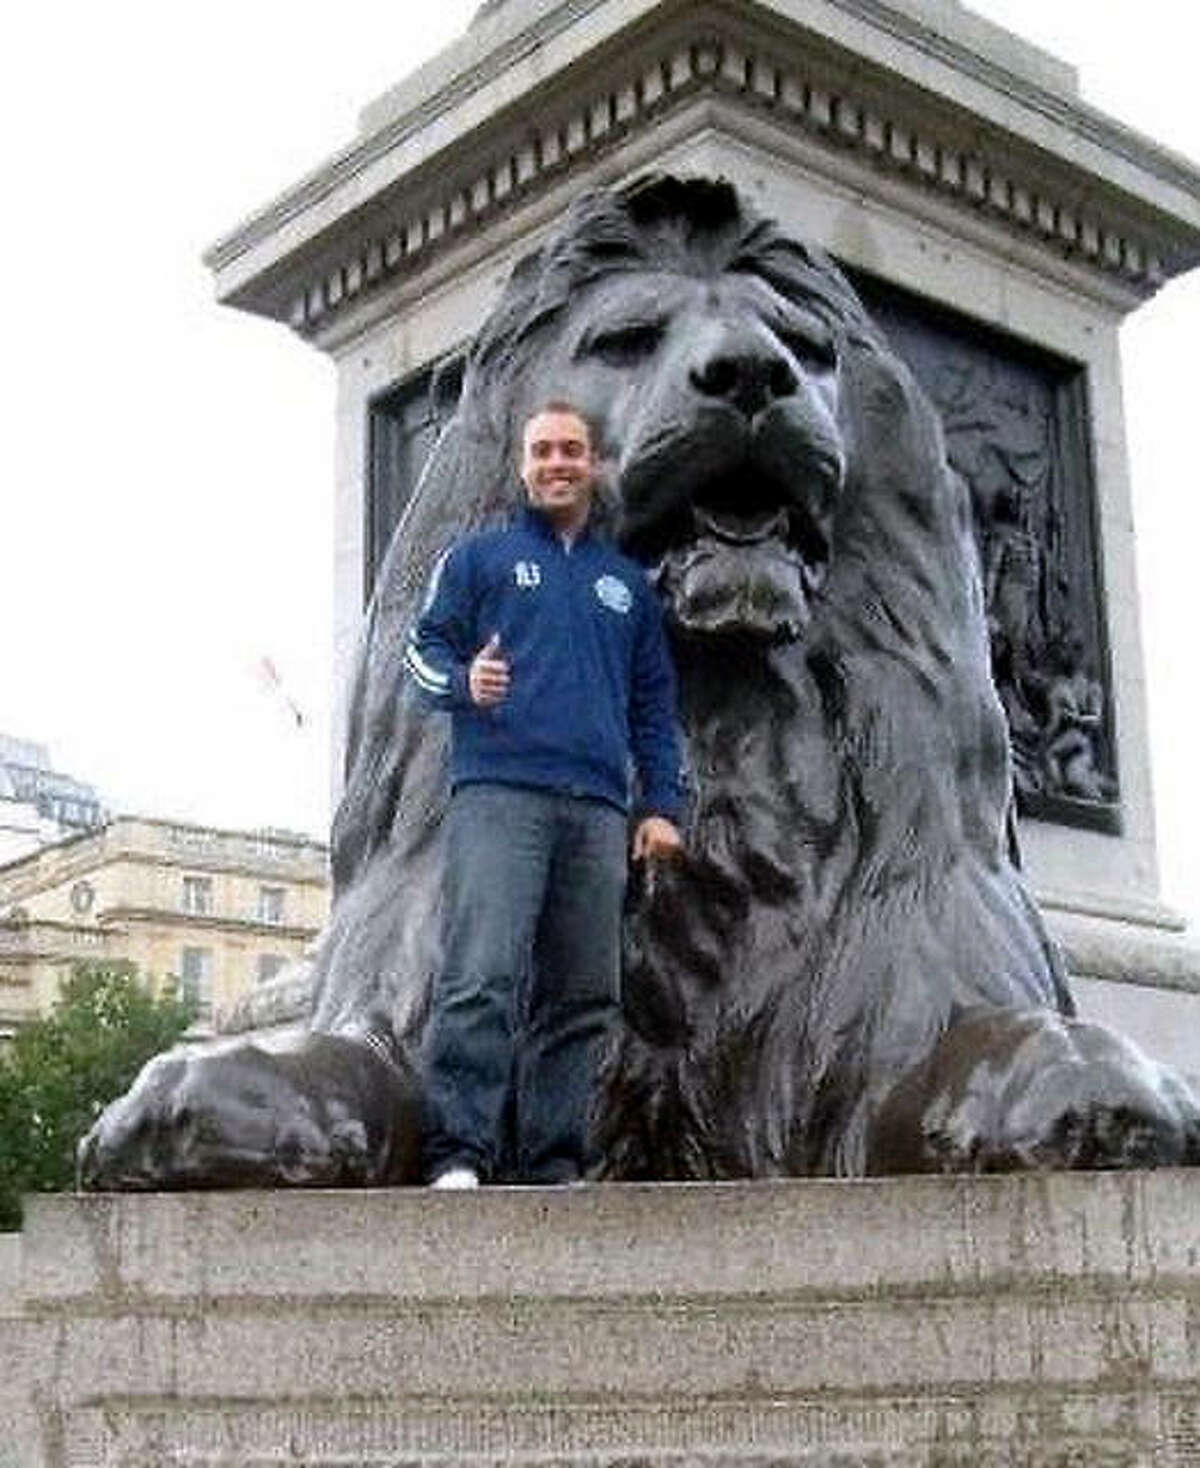 Jesse Daniels, the new girls soccer coach at East Alton-Wood River High, poses with a lion statue at Trafalgar Square in London in 2008. Daniels, who spent two years working in England as a teacher, said it was during that time he developed a new-found appreciation for soccer and learned plenty of new things about a game he thought he already knew a lot about.